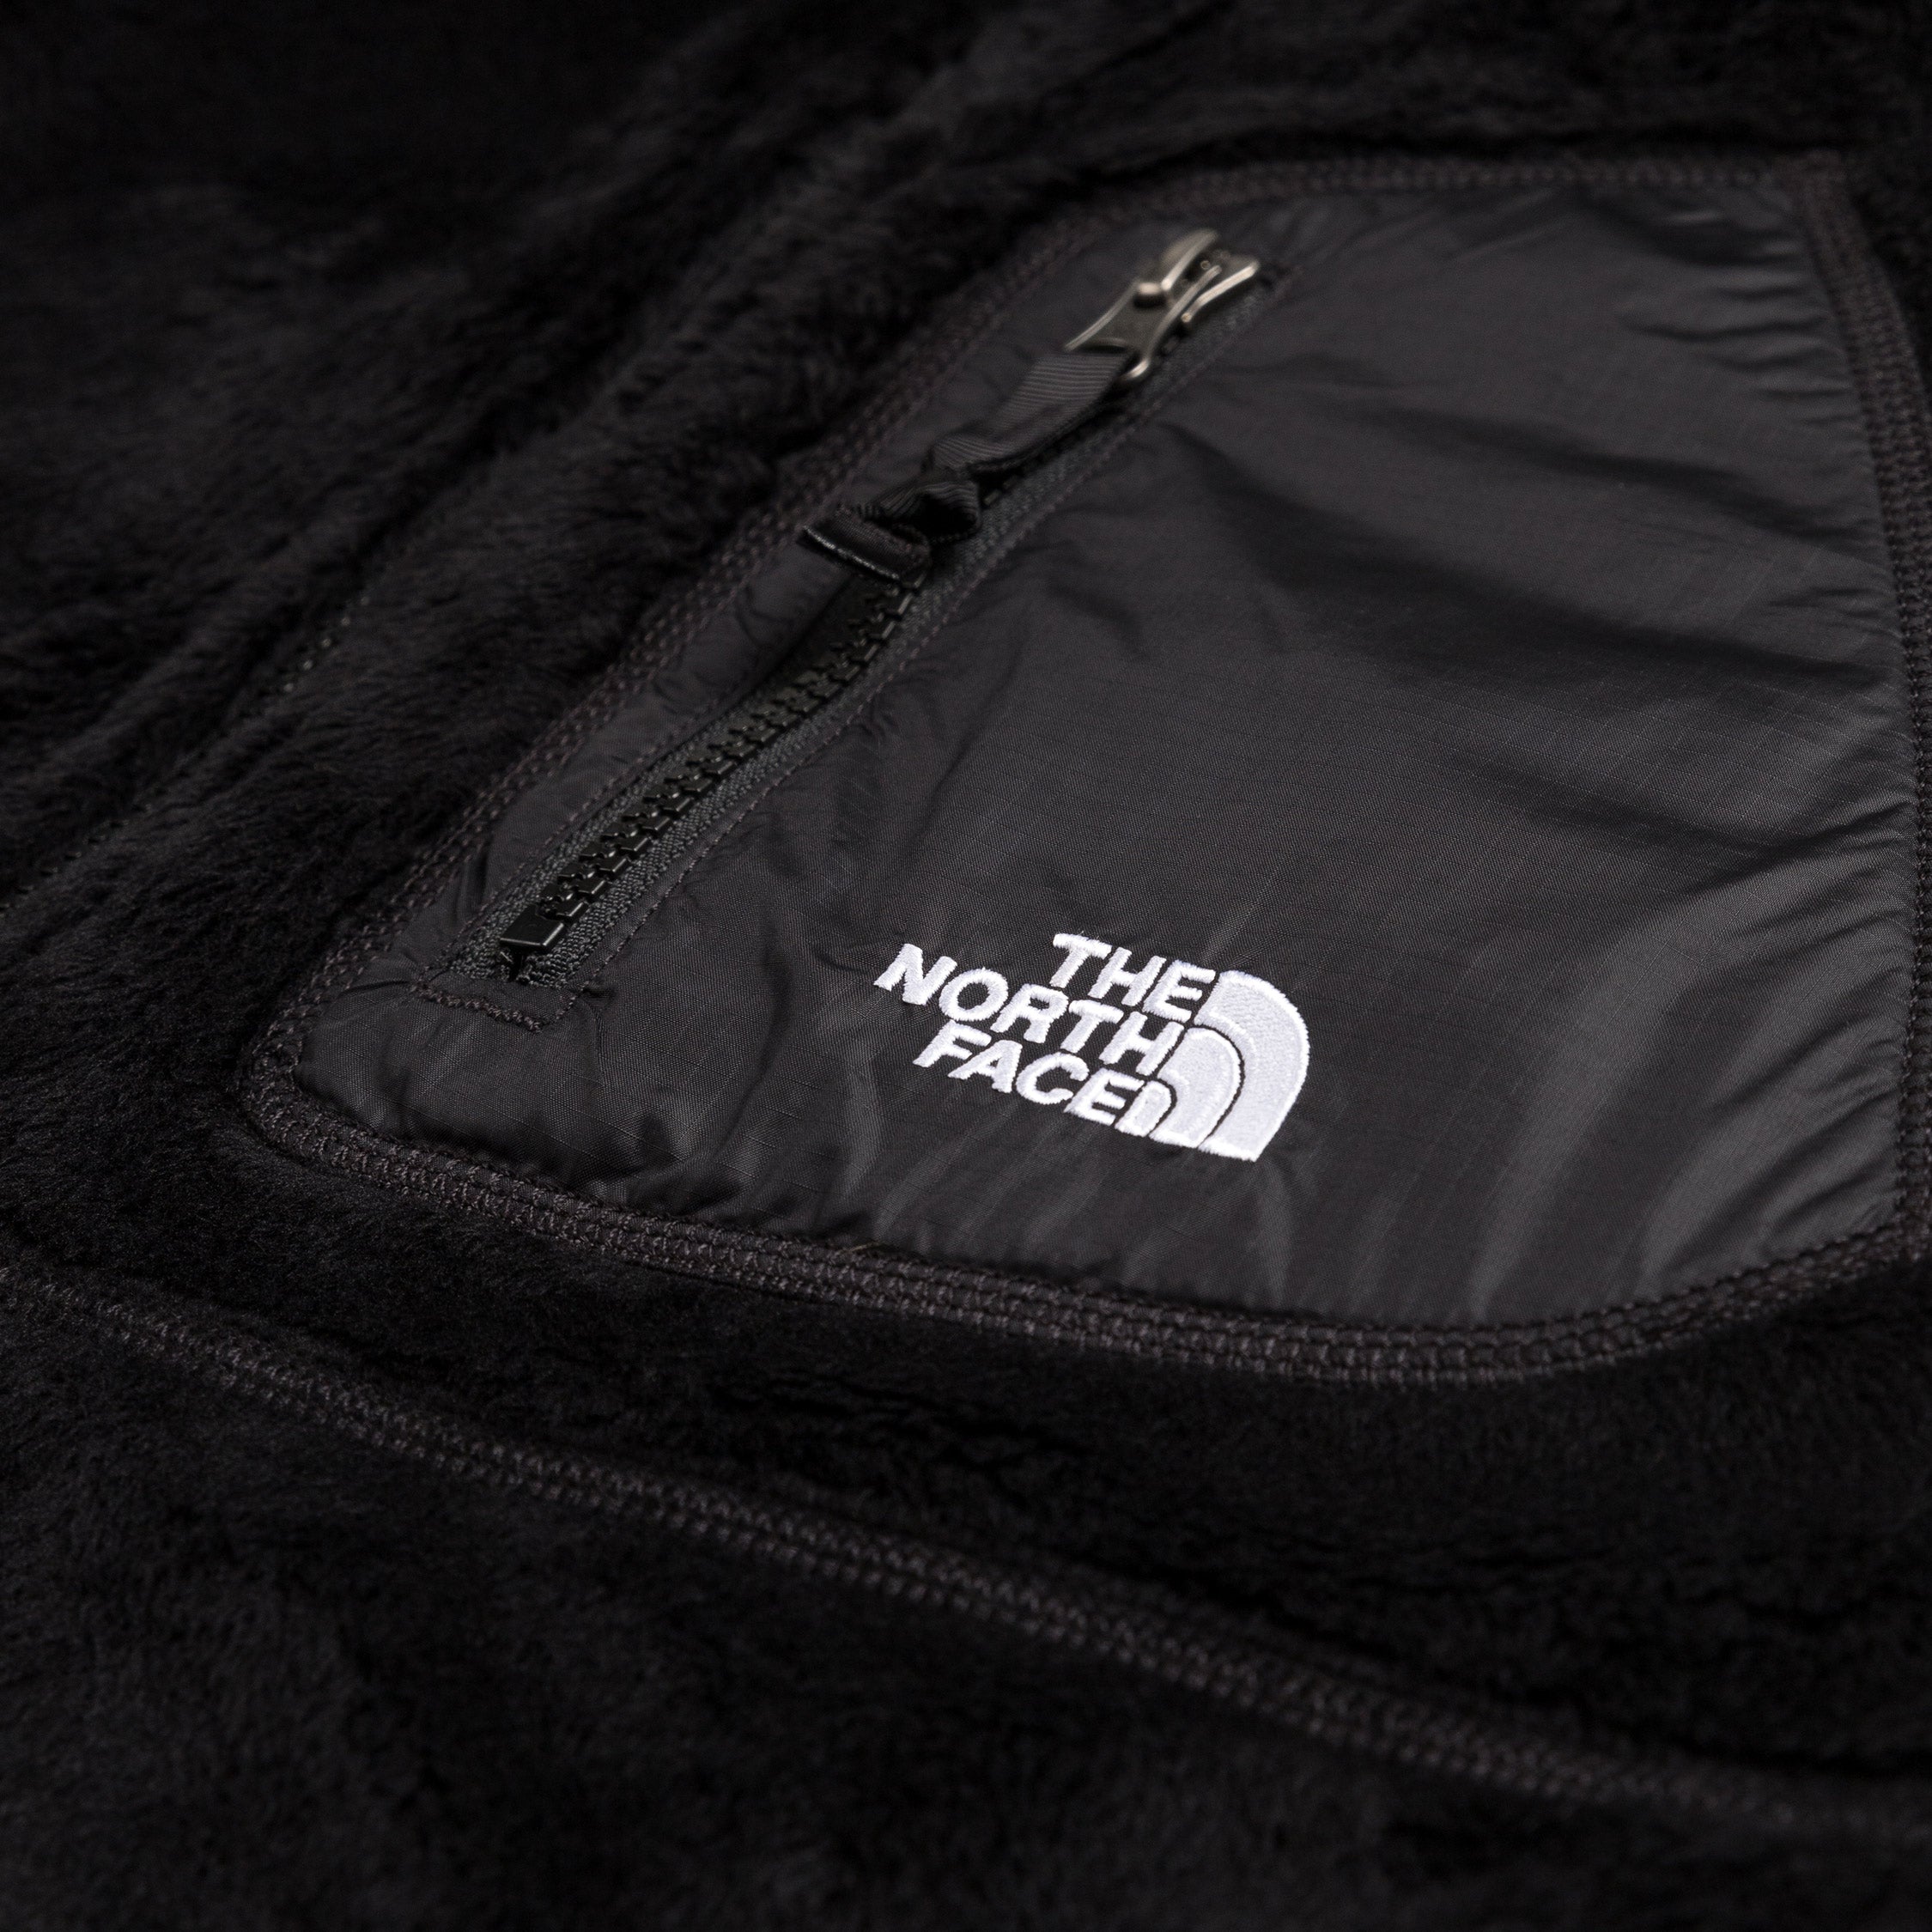 The North Face Versa Velour Jacket » Buy online now!